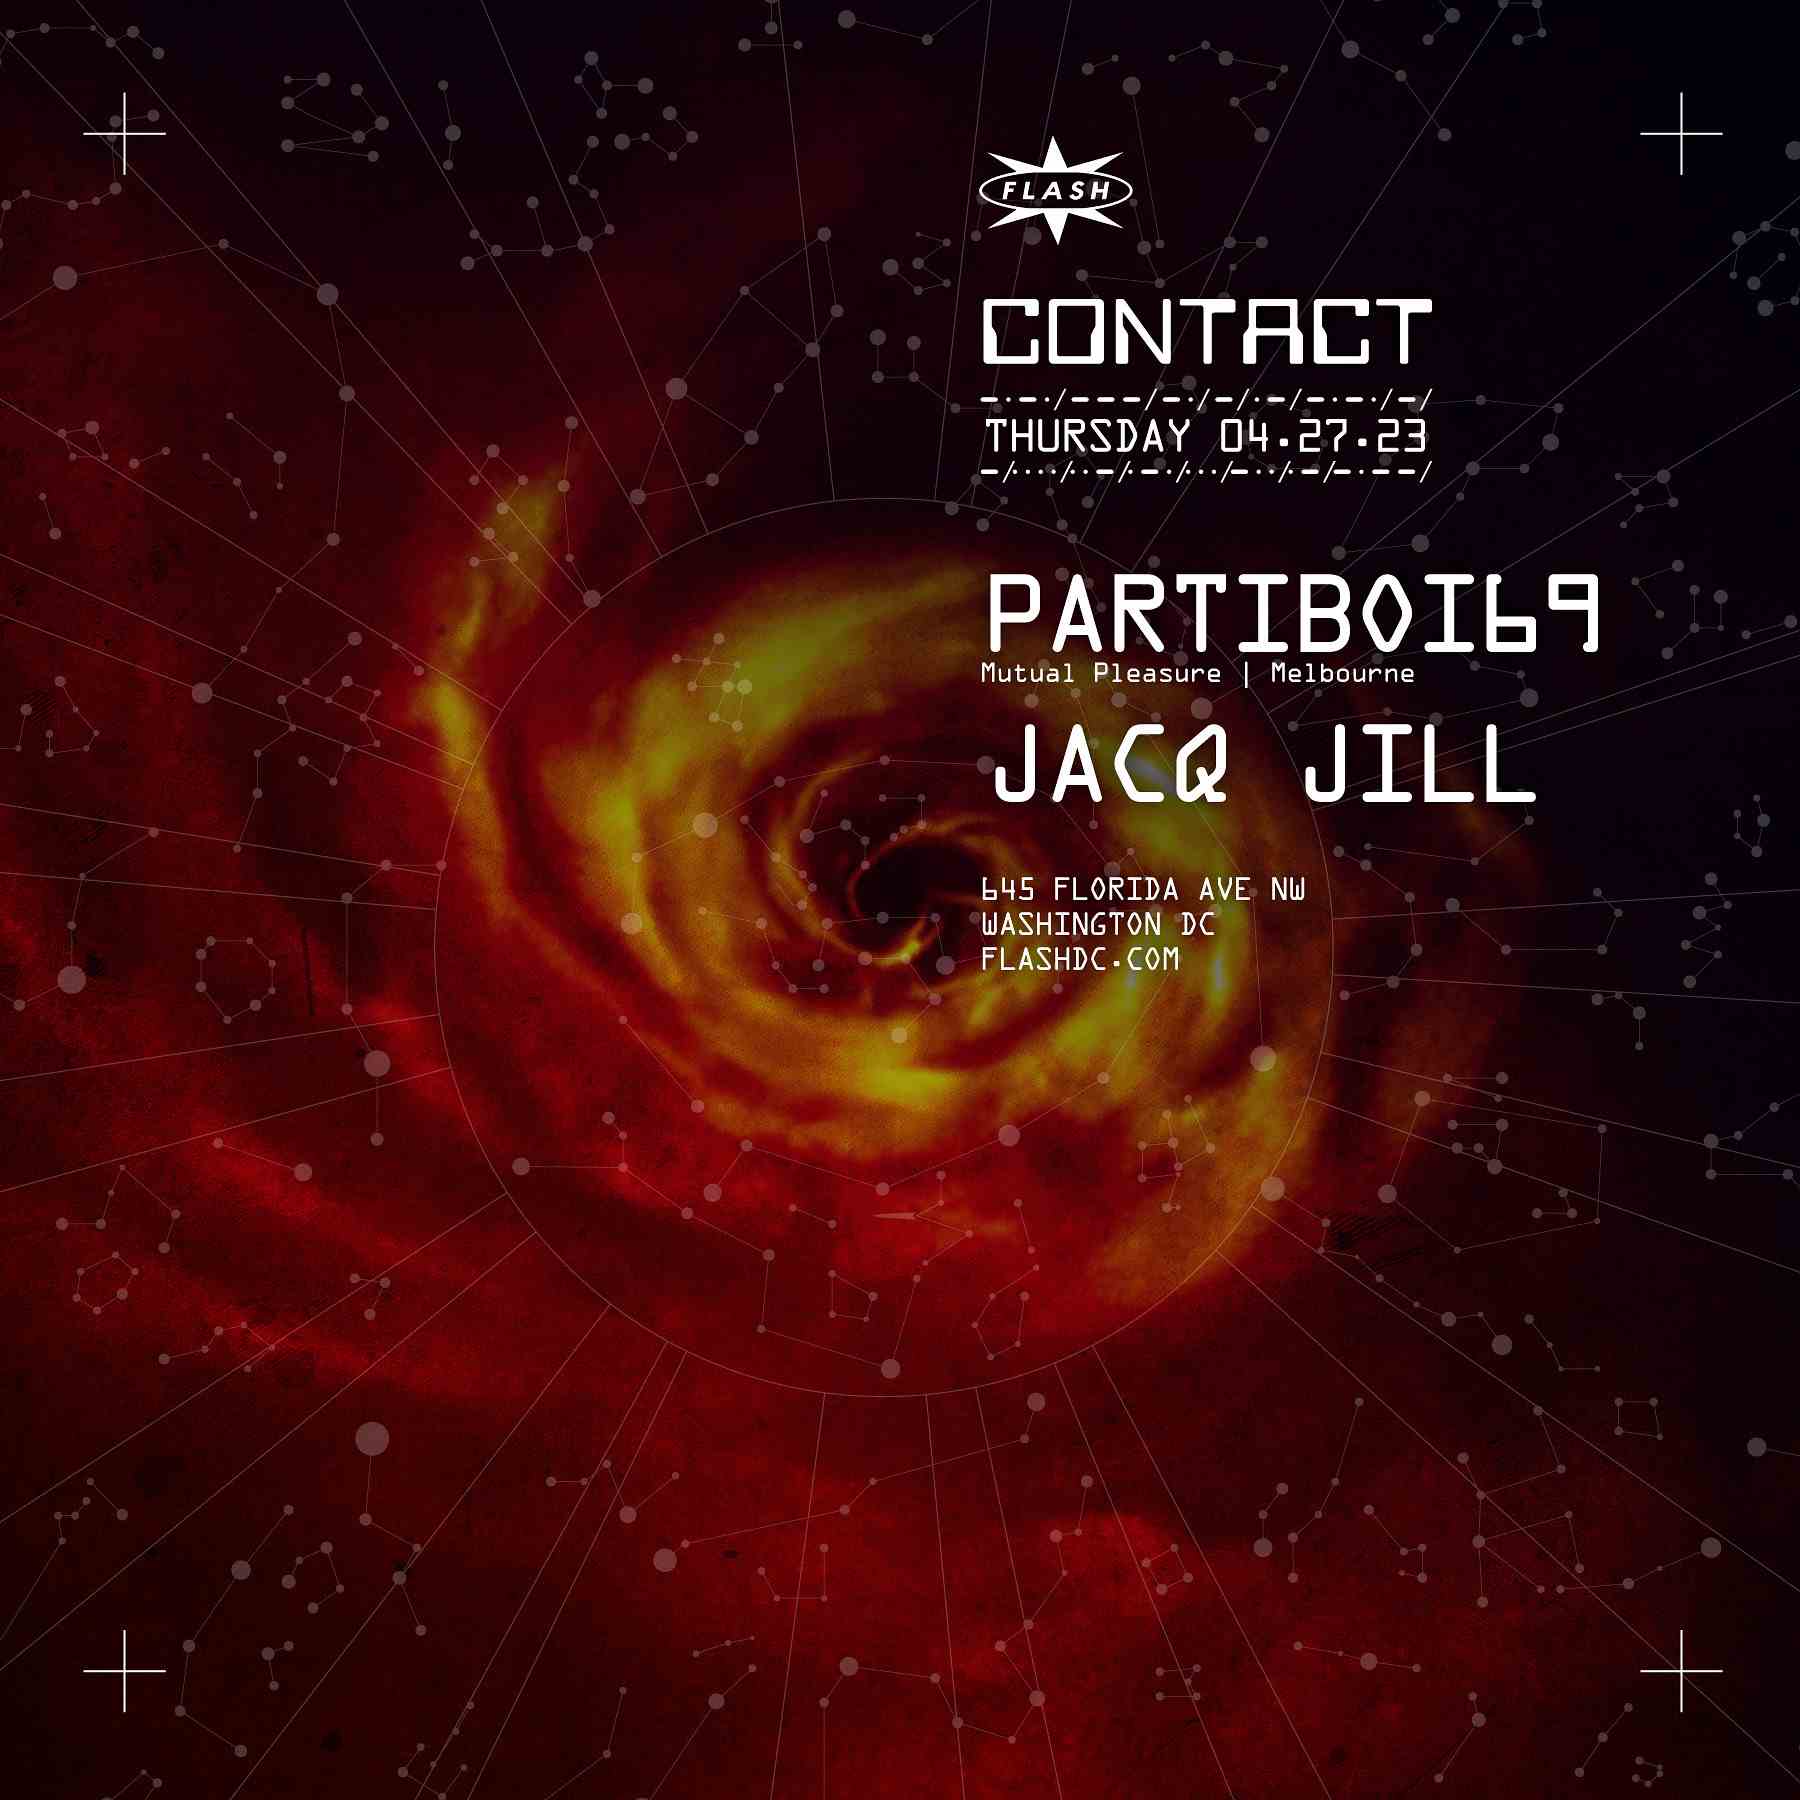 Event image for CONTACT: Partiboi69